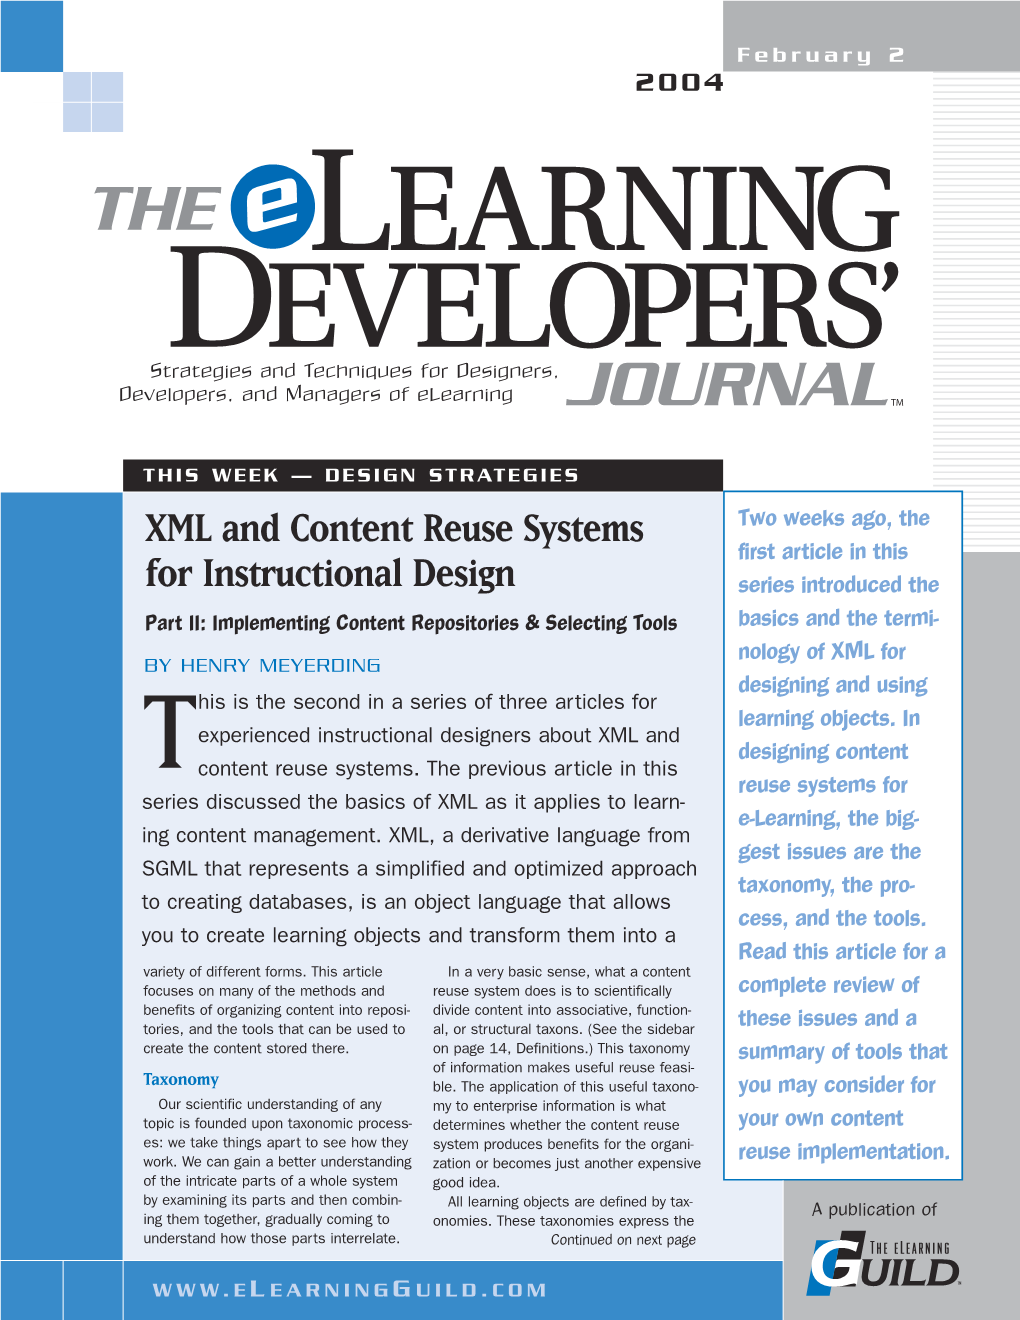 XML and Content Reuse Systems for Instructional Design